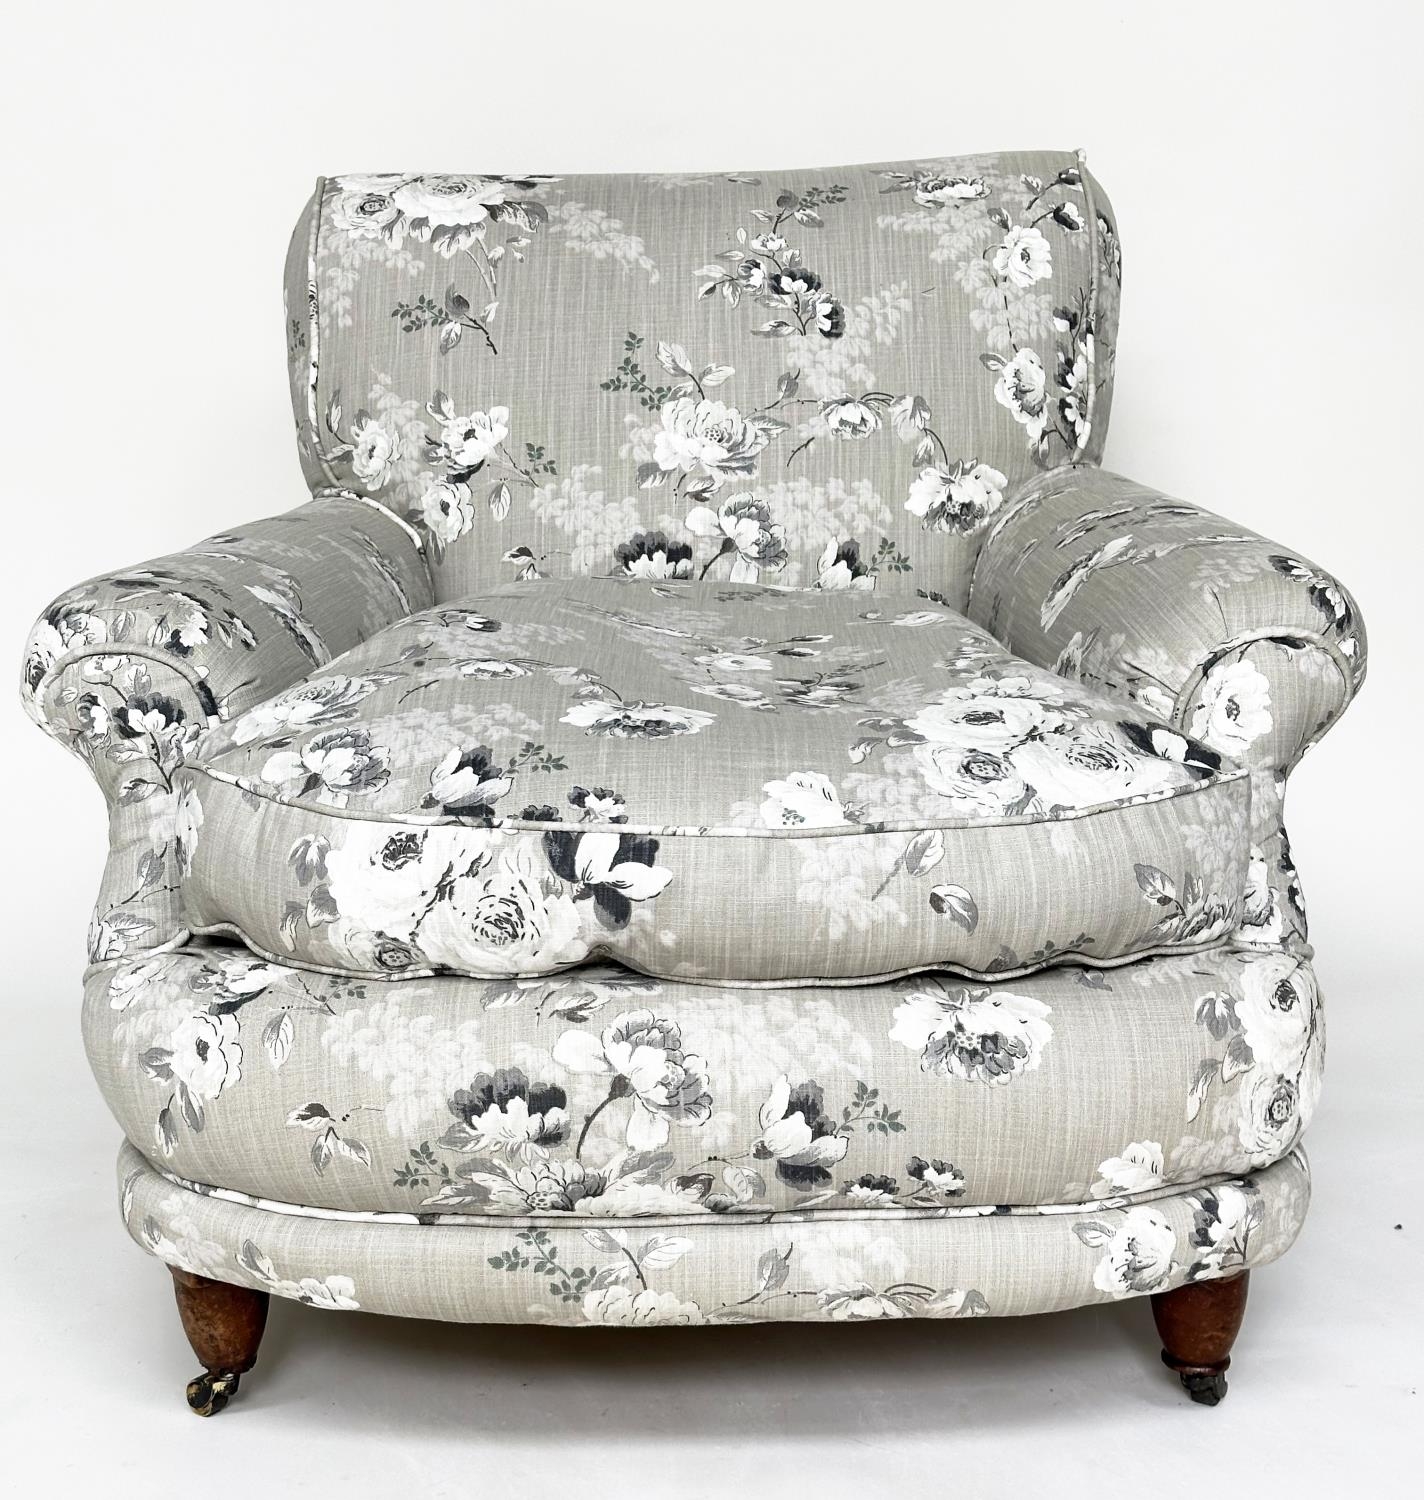 WILLIAM BIRCH ARMCHAIR, 19th century Howard type, newly upholstered in grey linen impressed numerals - Image 8 of 13